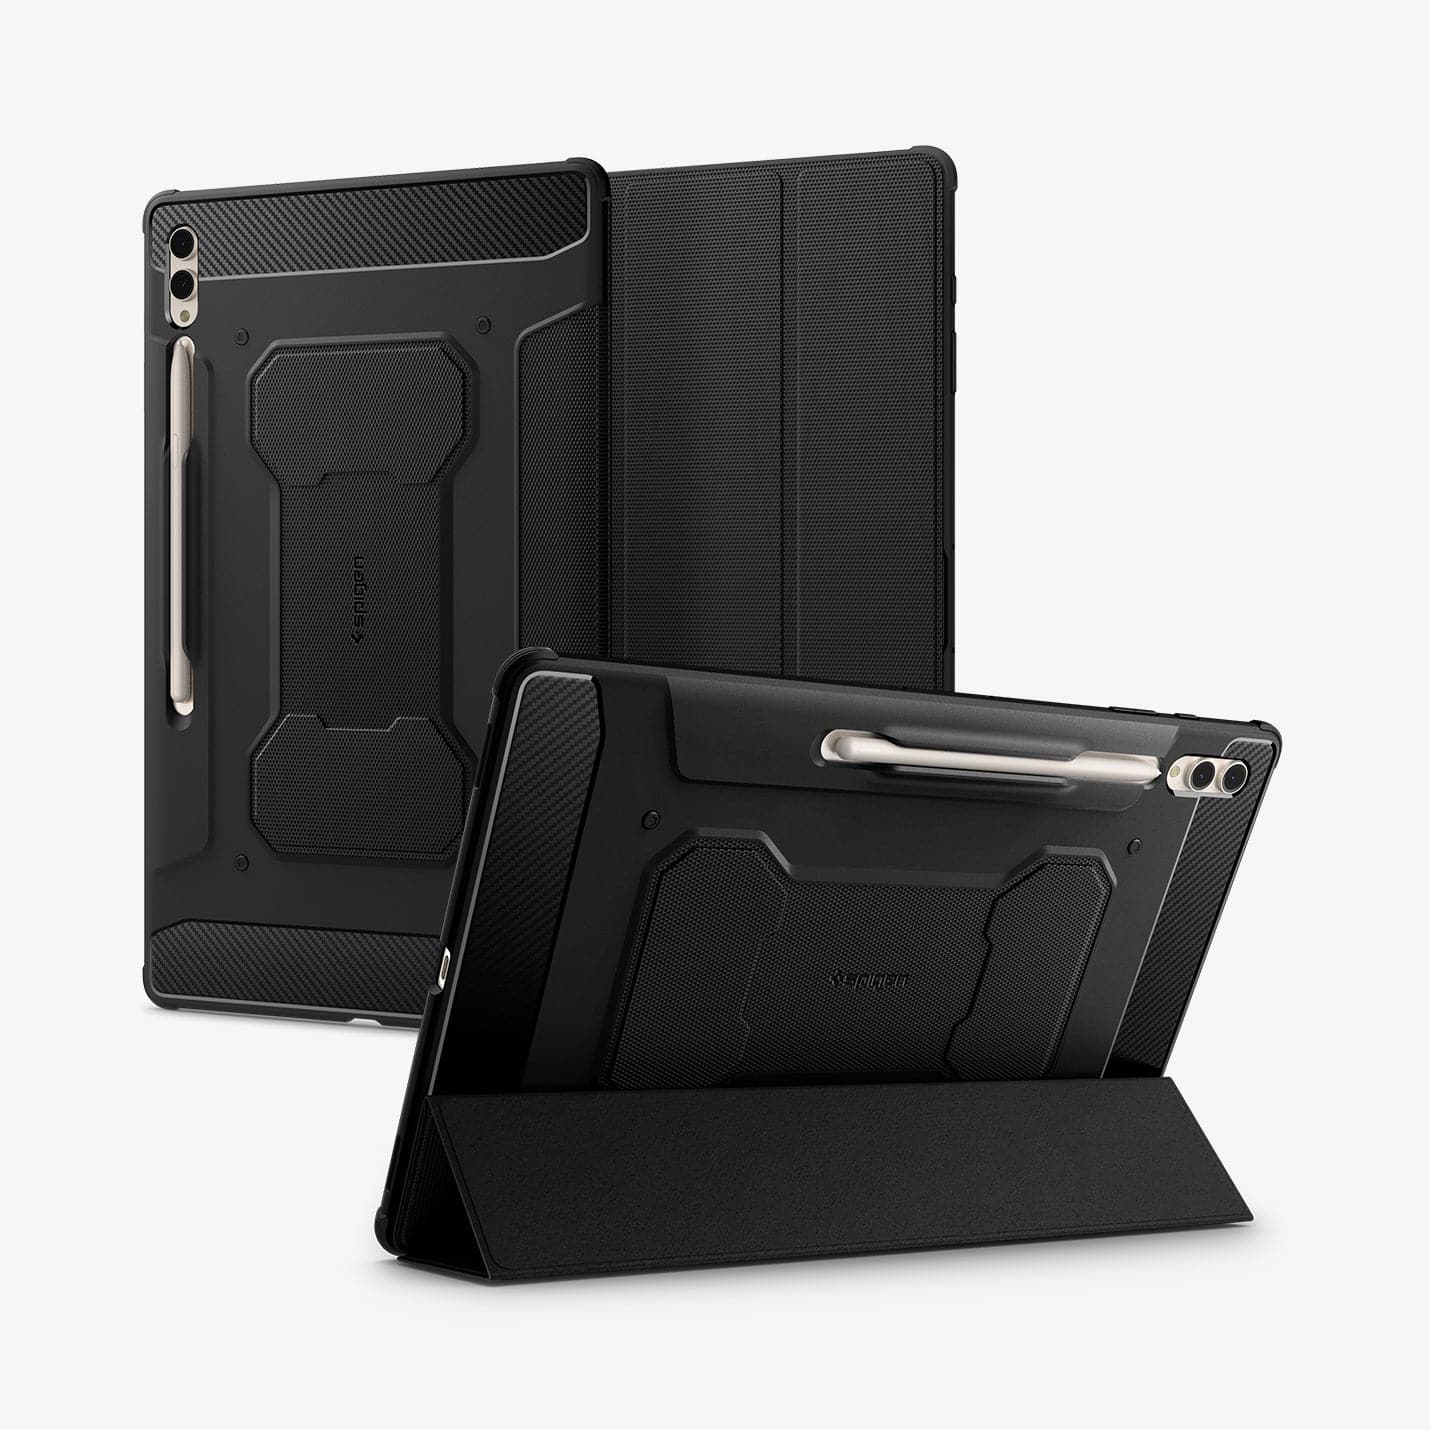 ACS06538 - Galaxy Tab S9 Ultra Case Rugged Armor Pro in black showing the back, front and device propped up by built in kickstand